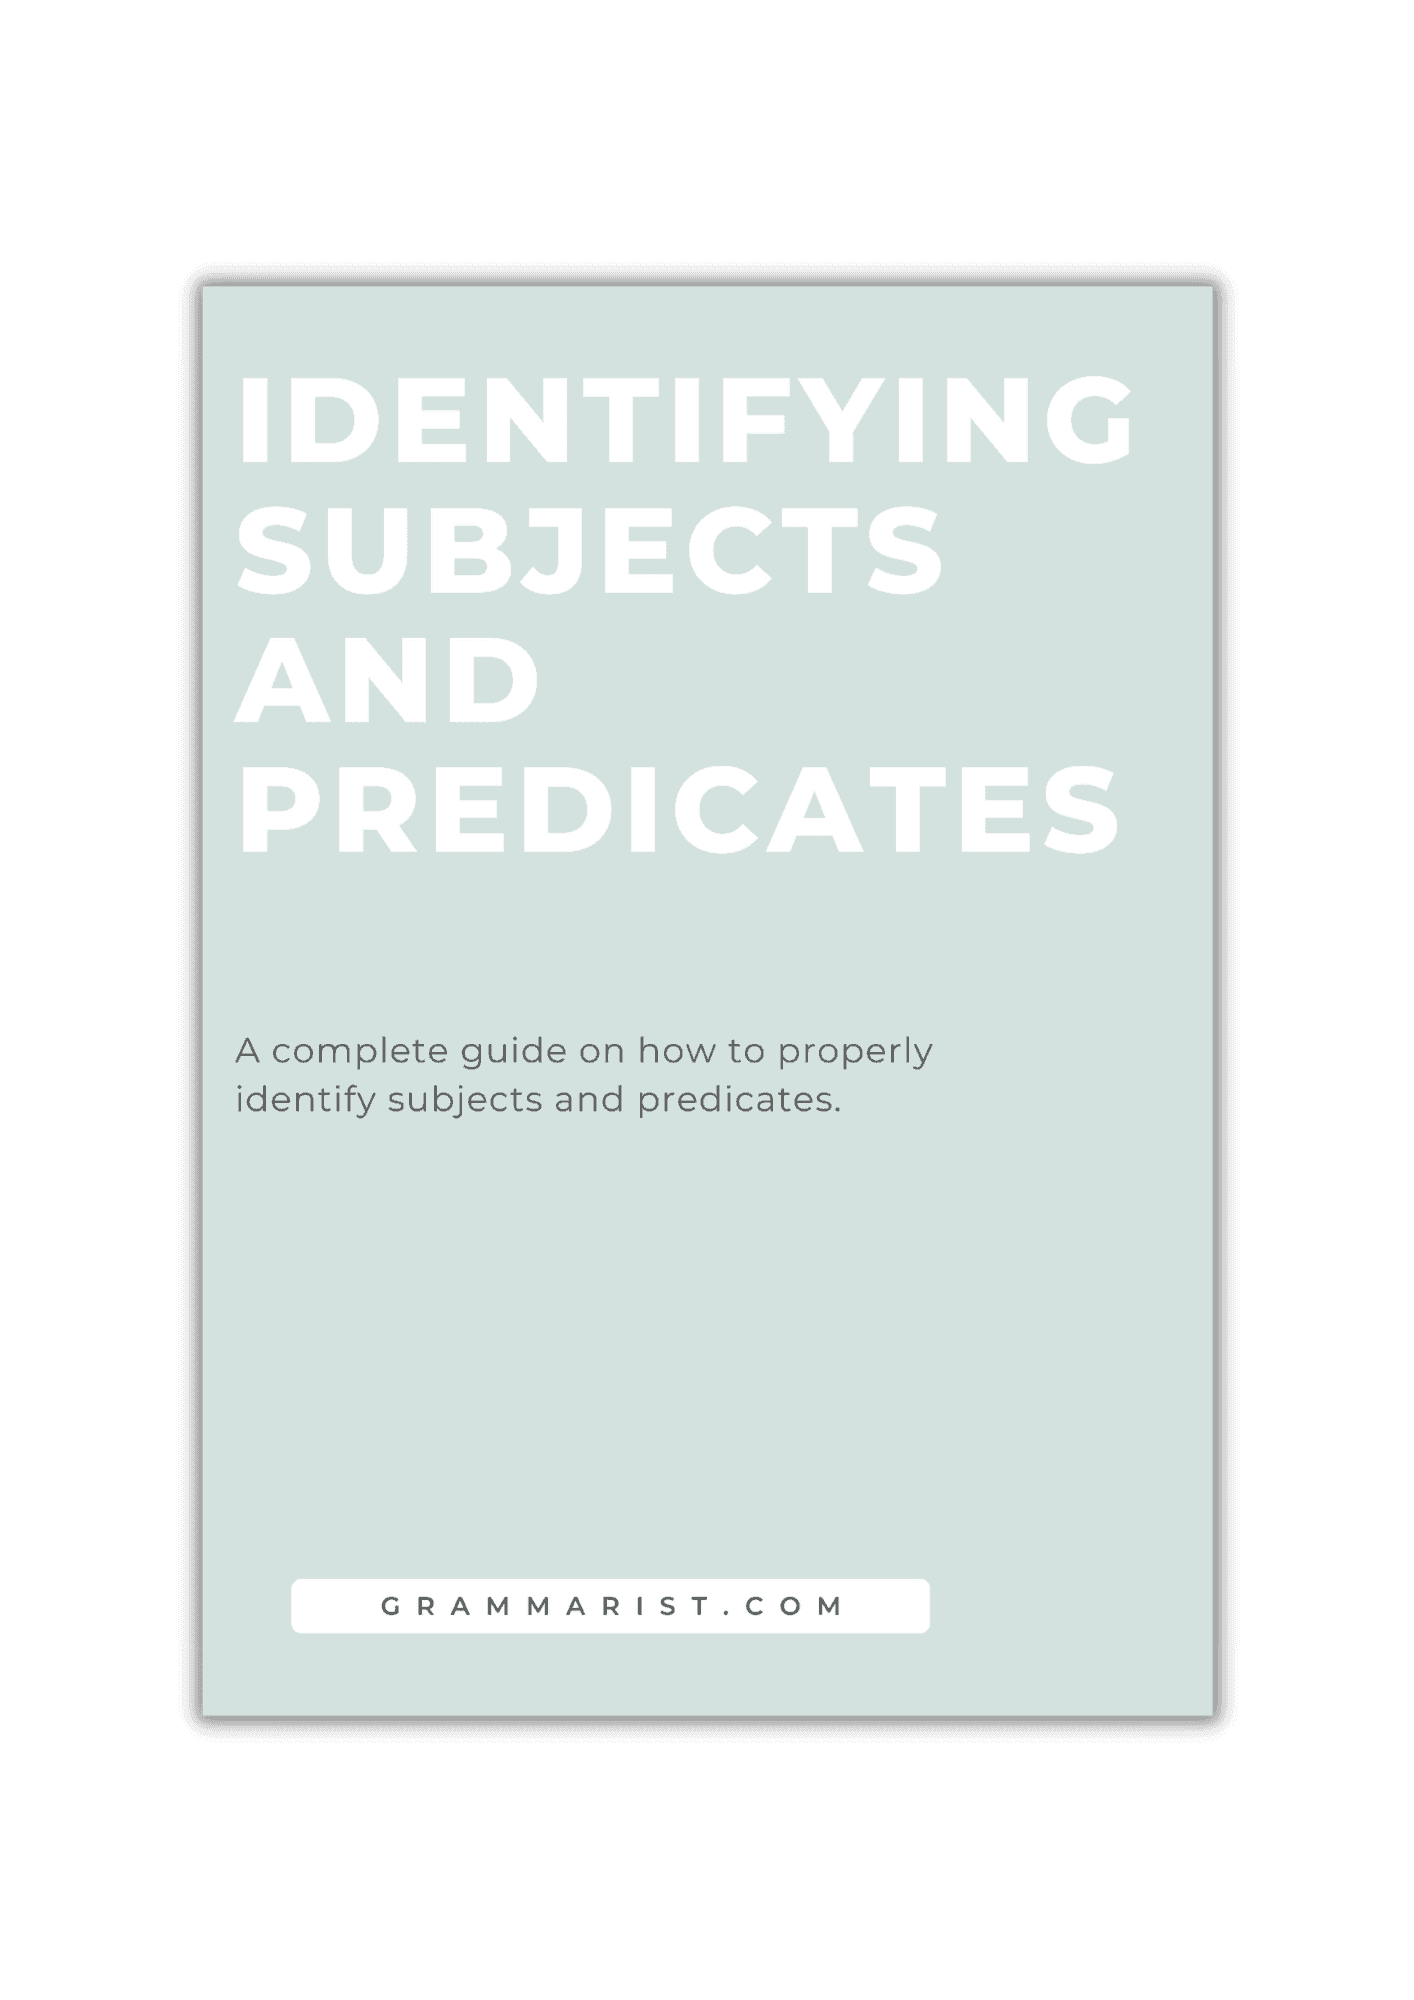 Identifying-Subjects-and-Predicates-PDF-6-